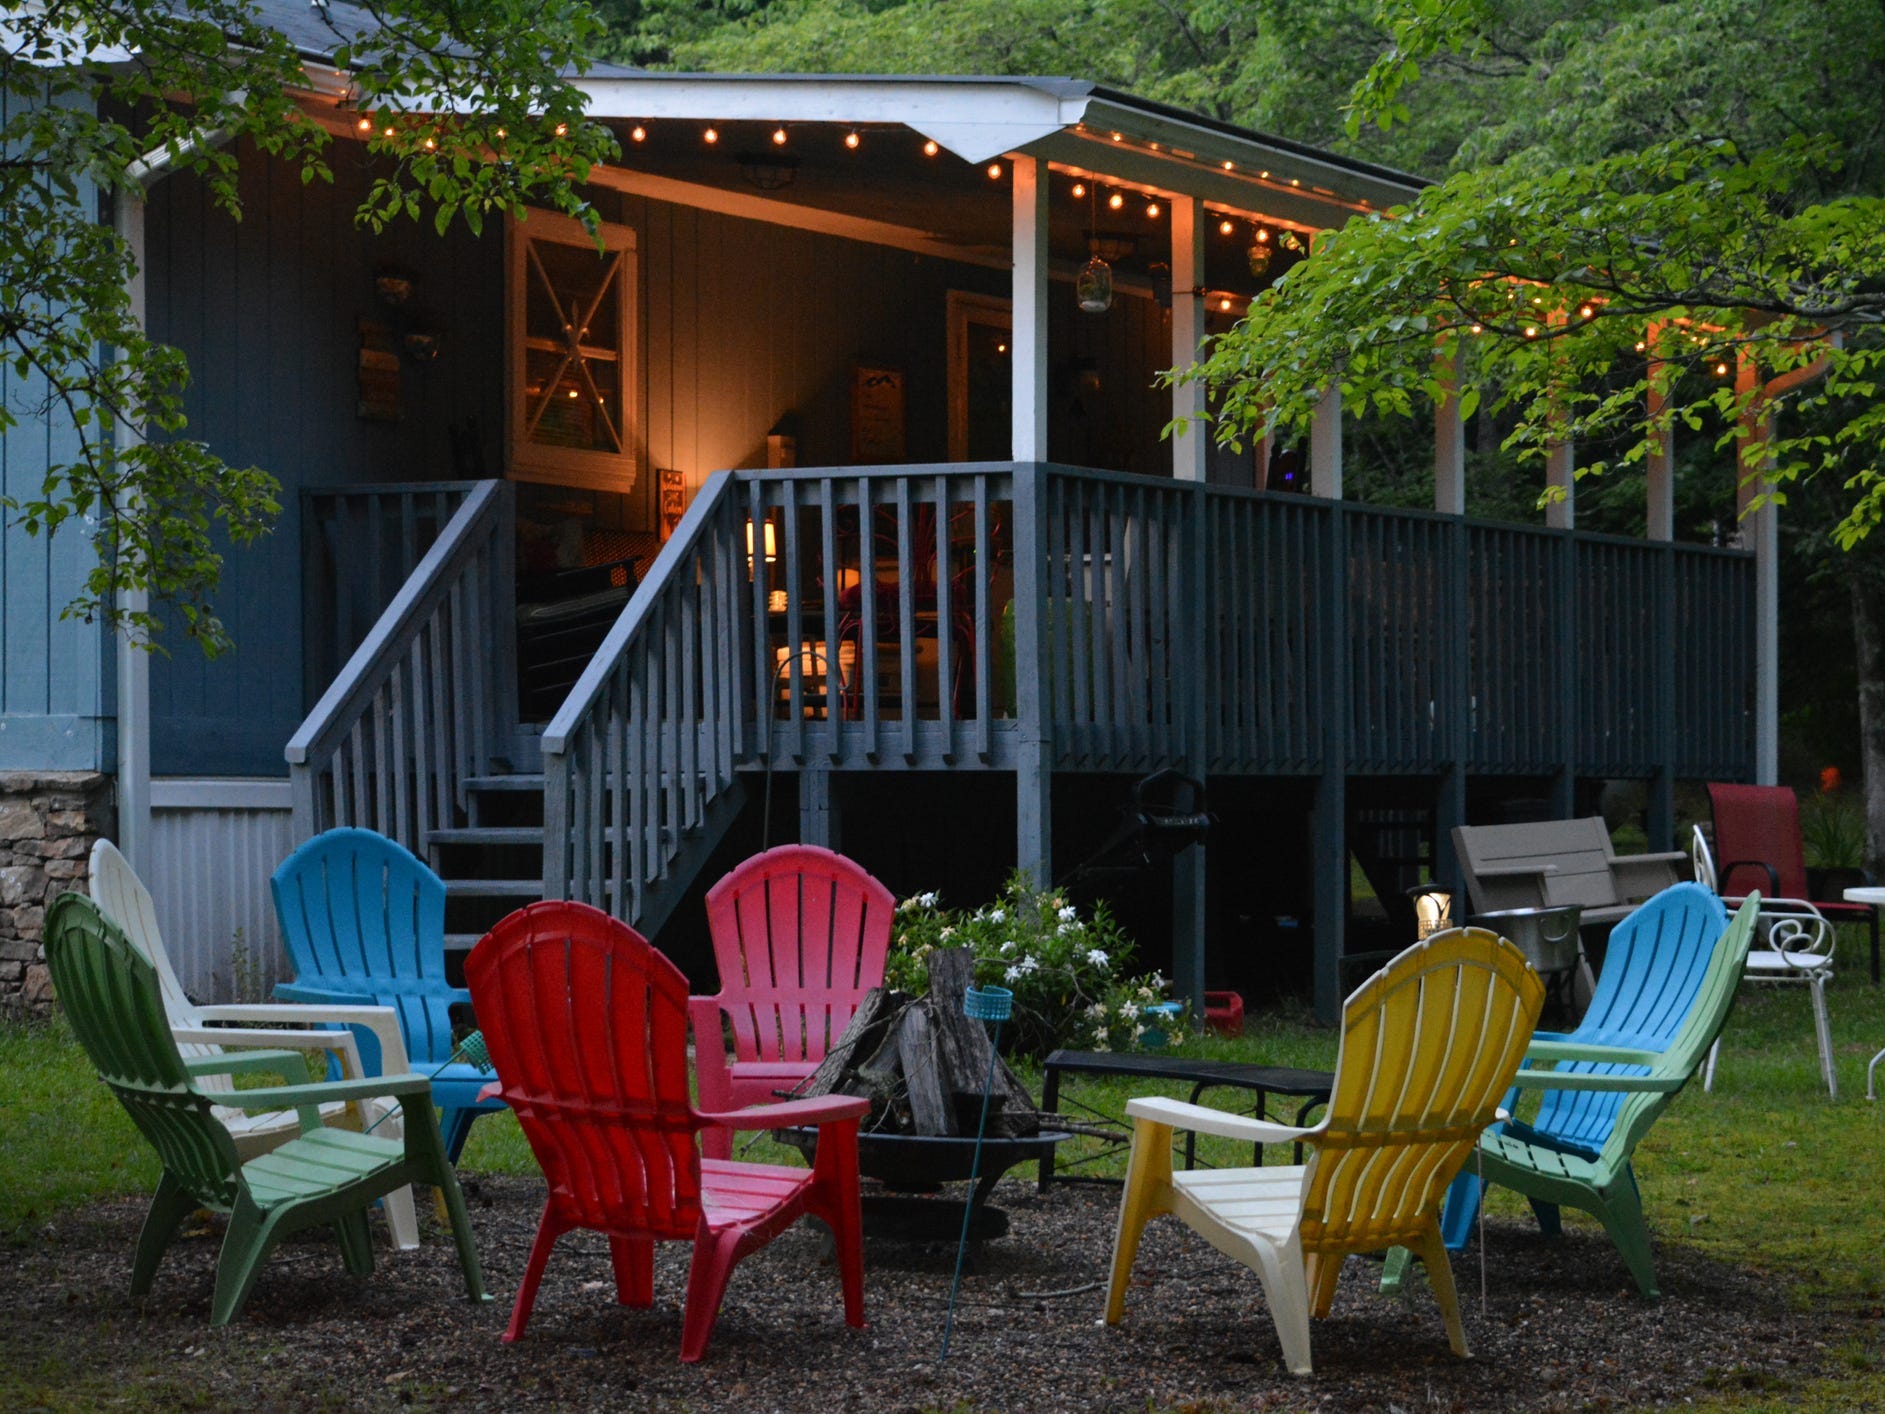 The backyard of blue cottage with a fire pit surrounded by colorful Adirondack chairs